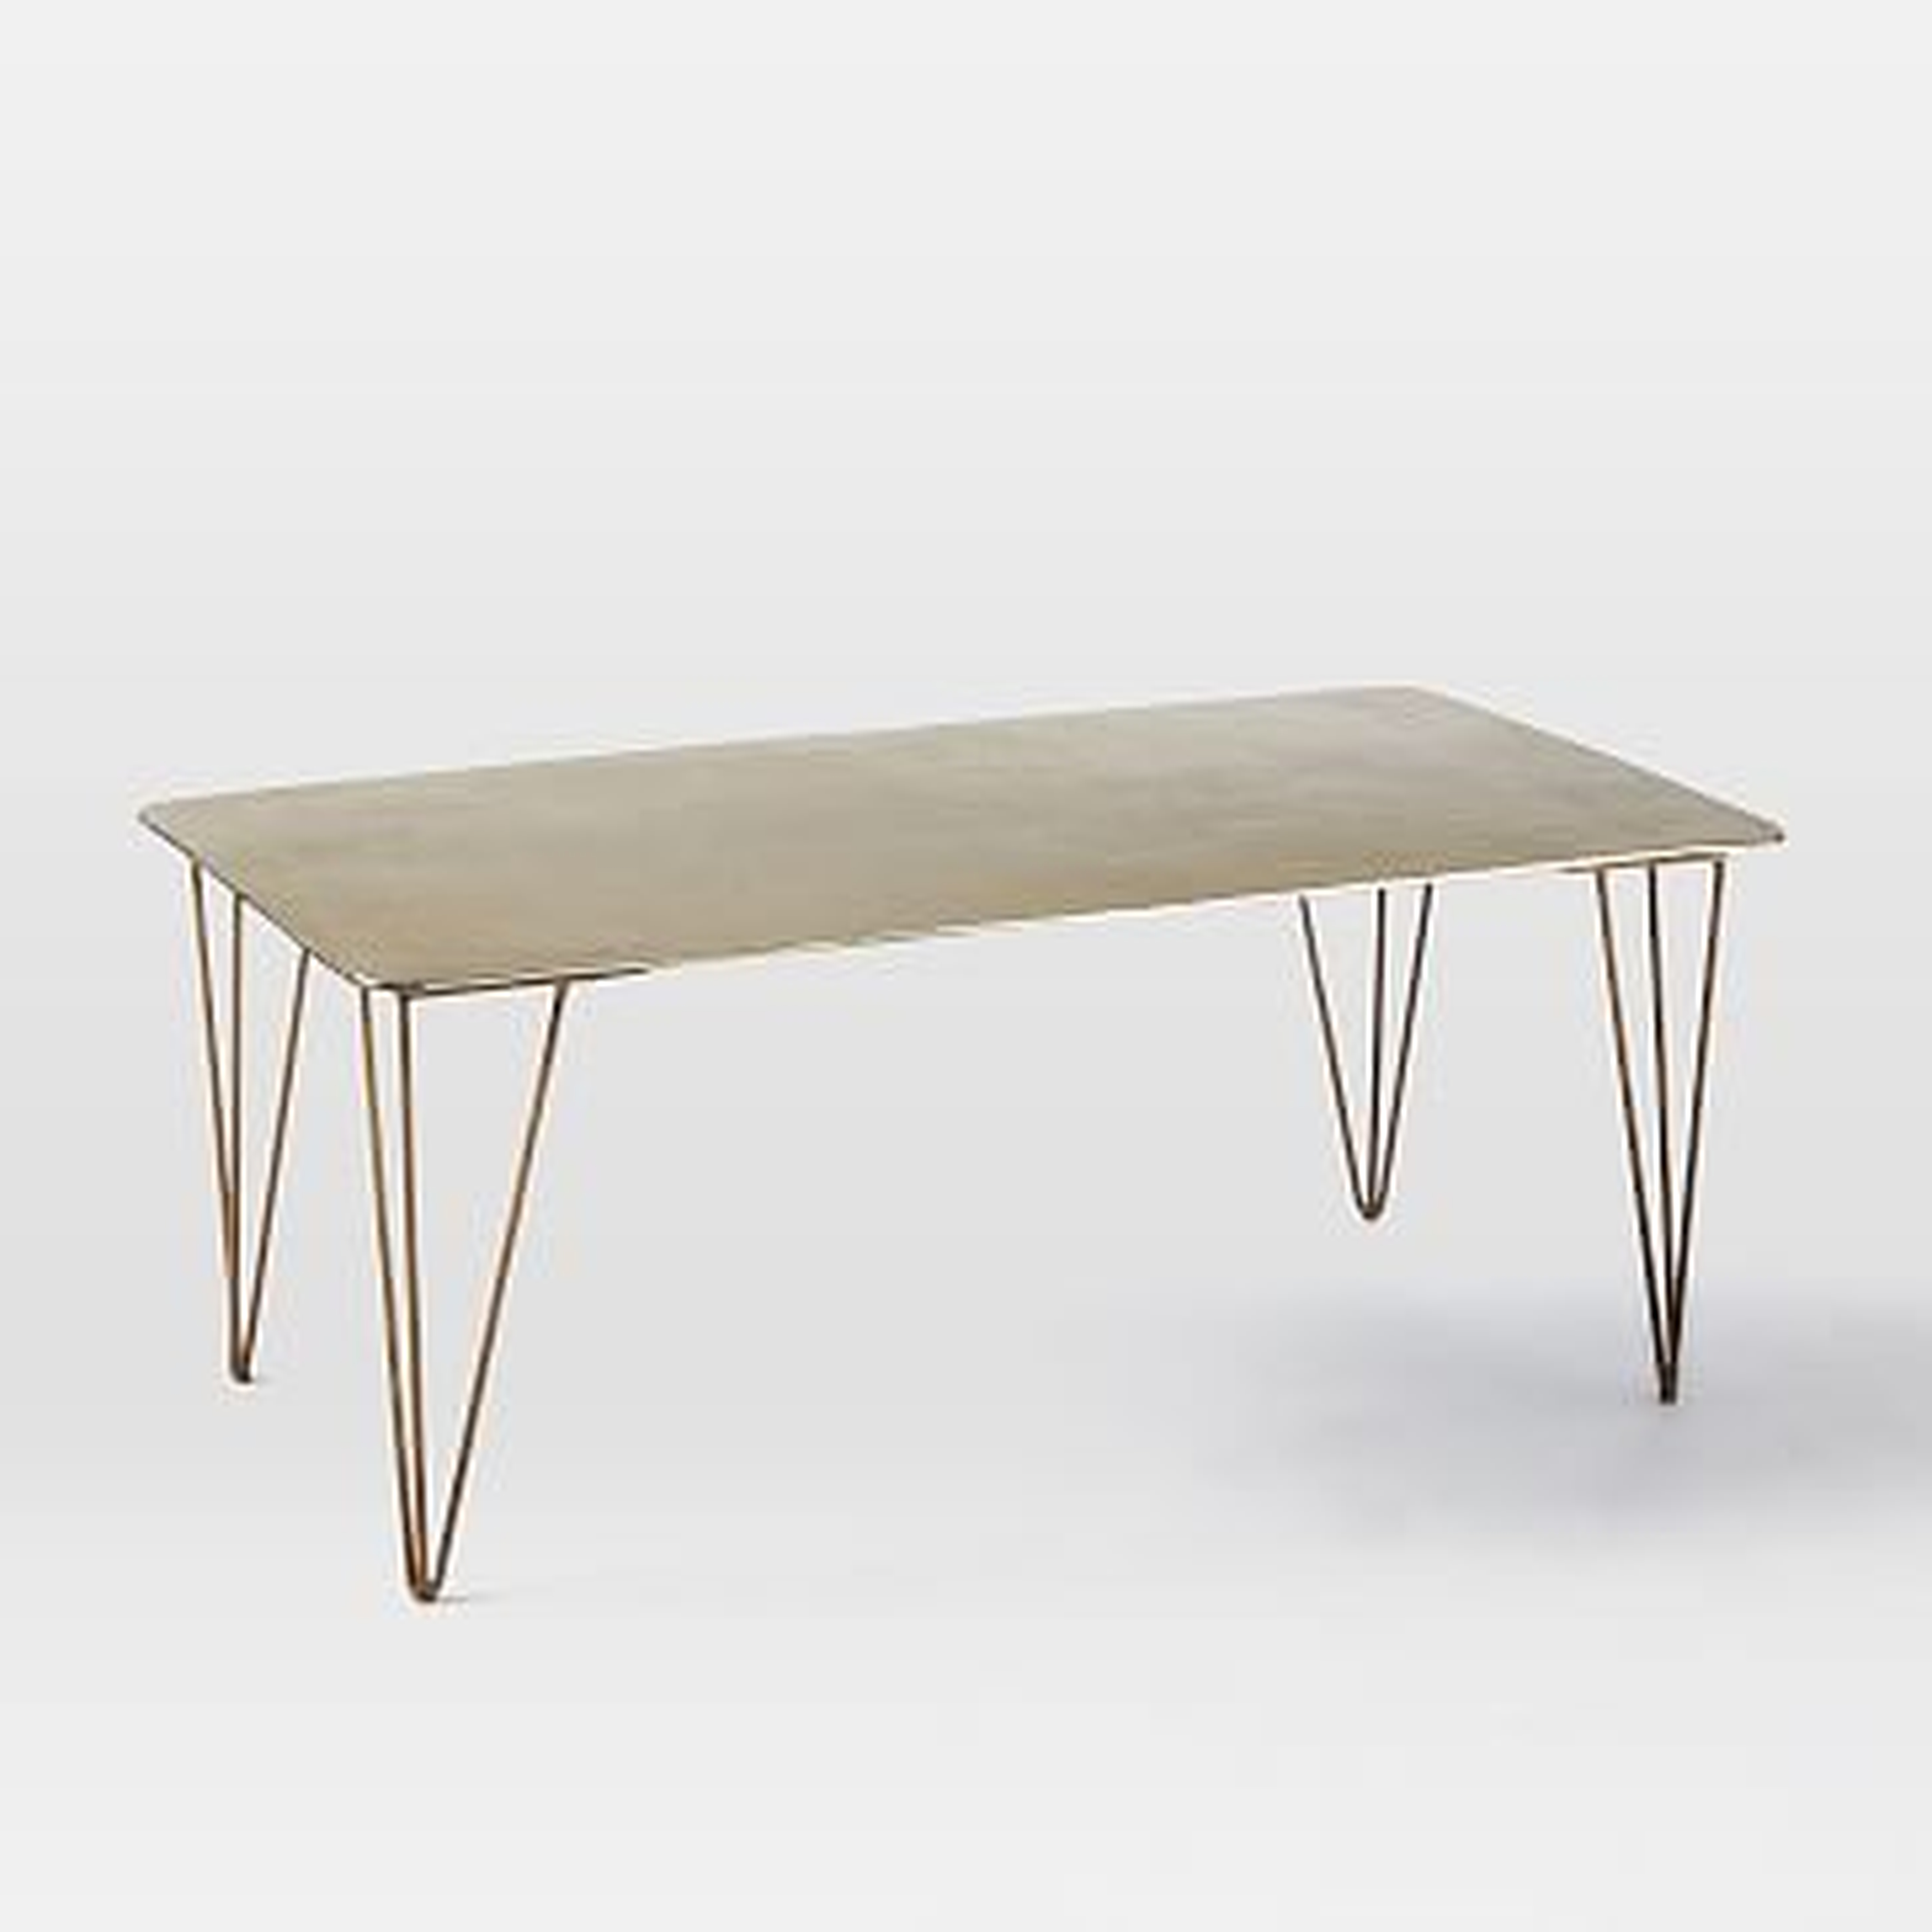 Hairpin Brass Plated Coffee Table - West Elm